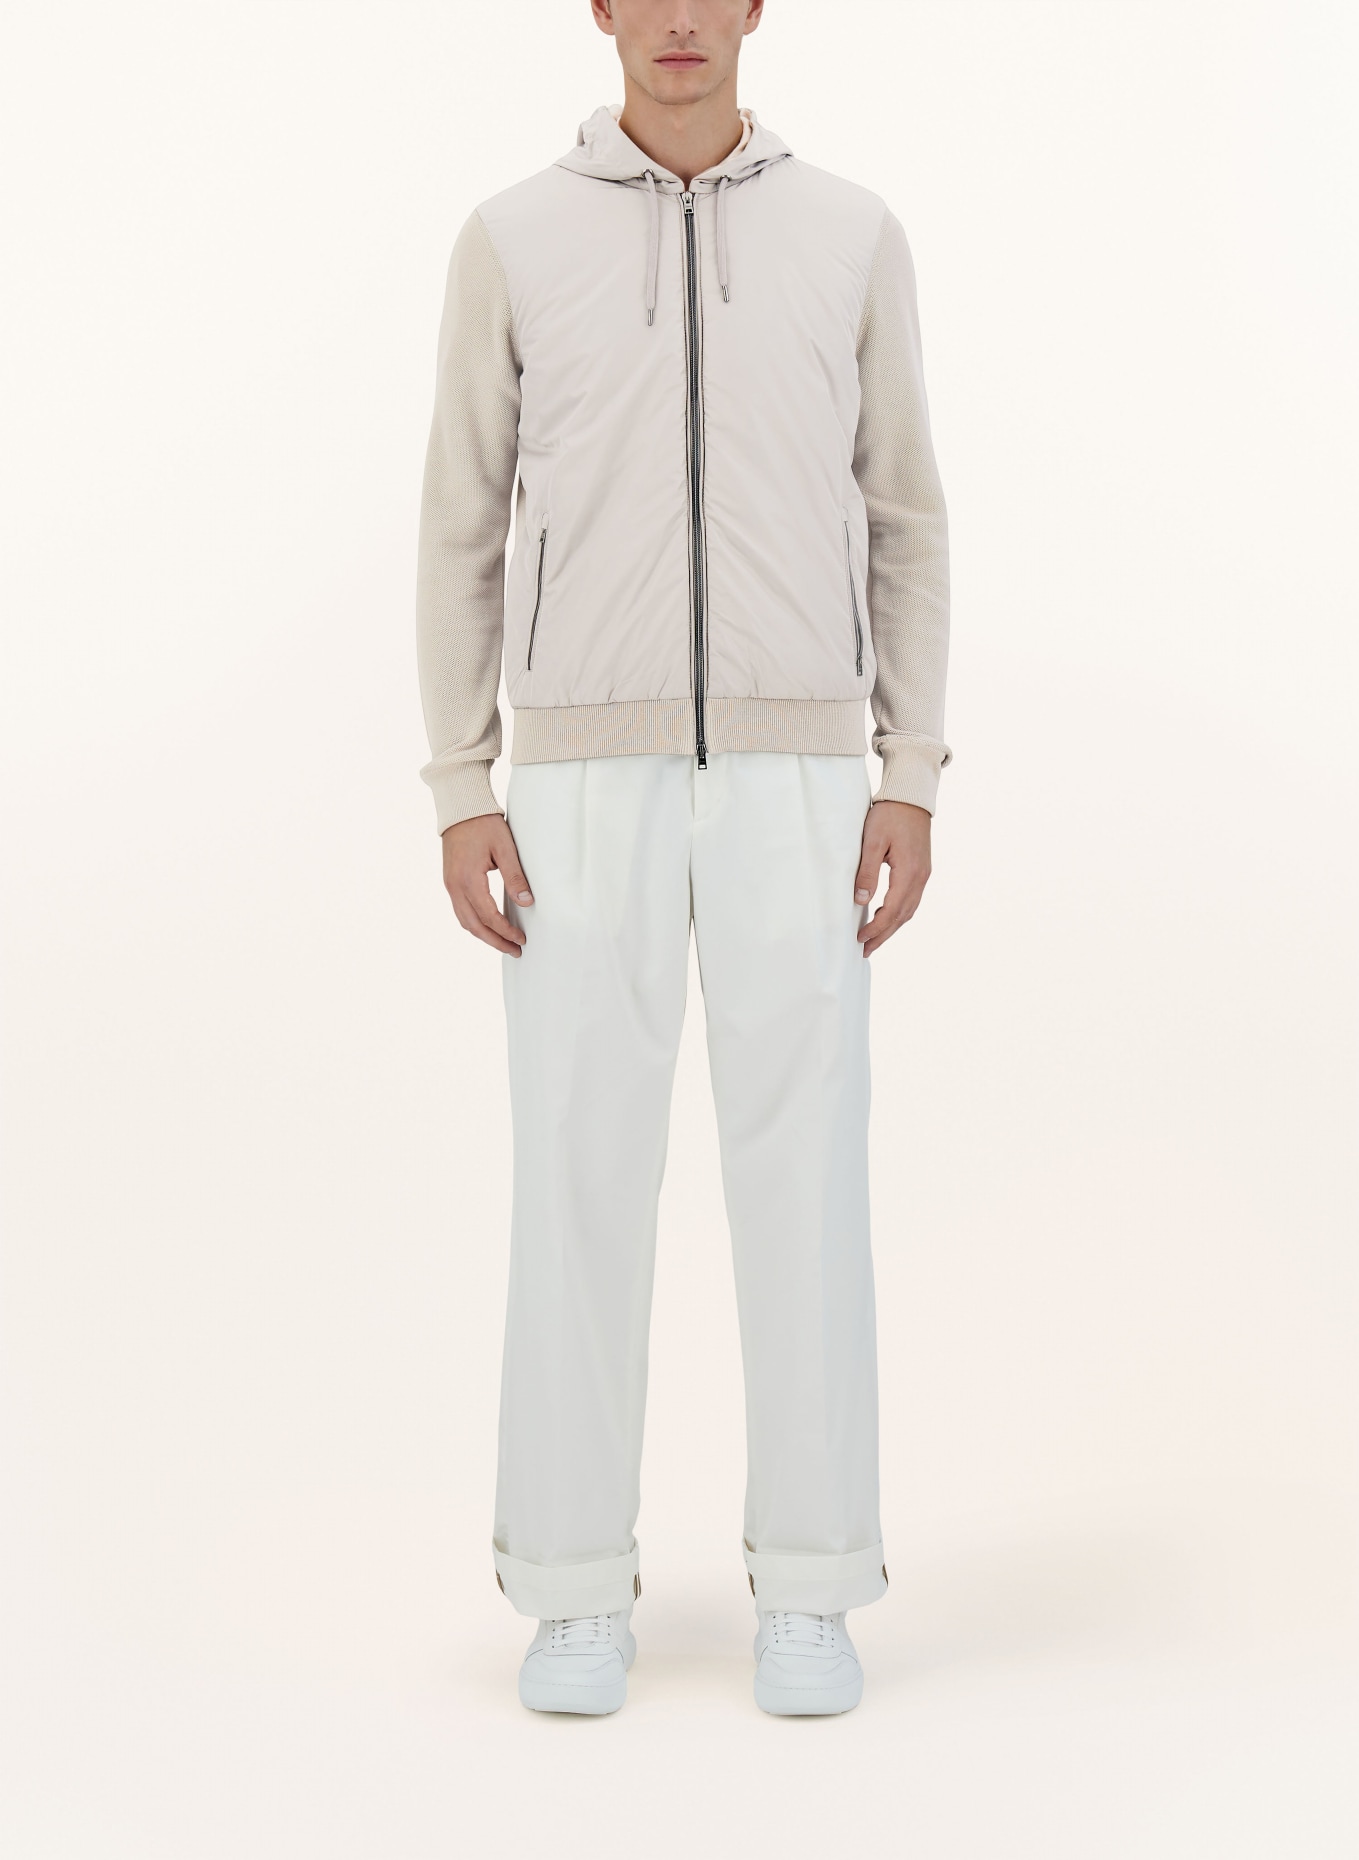 HERNO Jacket in mixed materials, Color: LIGHT GRAY (Image 2)